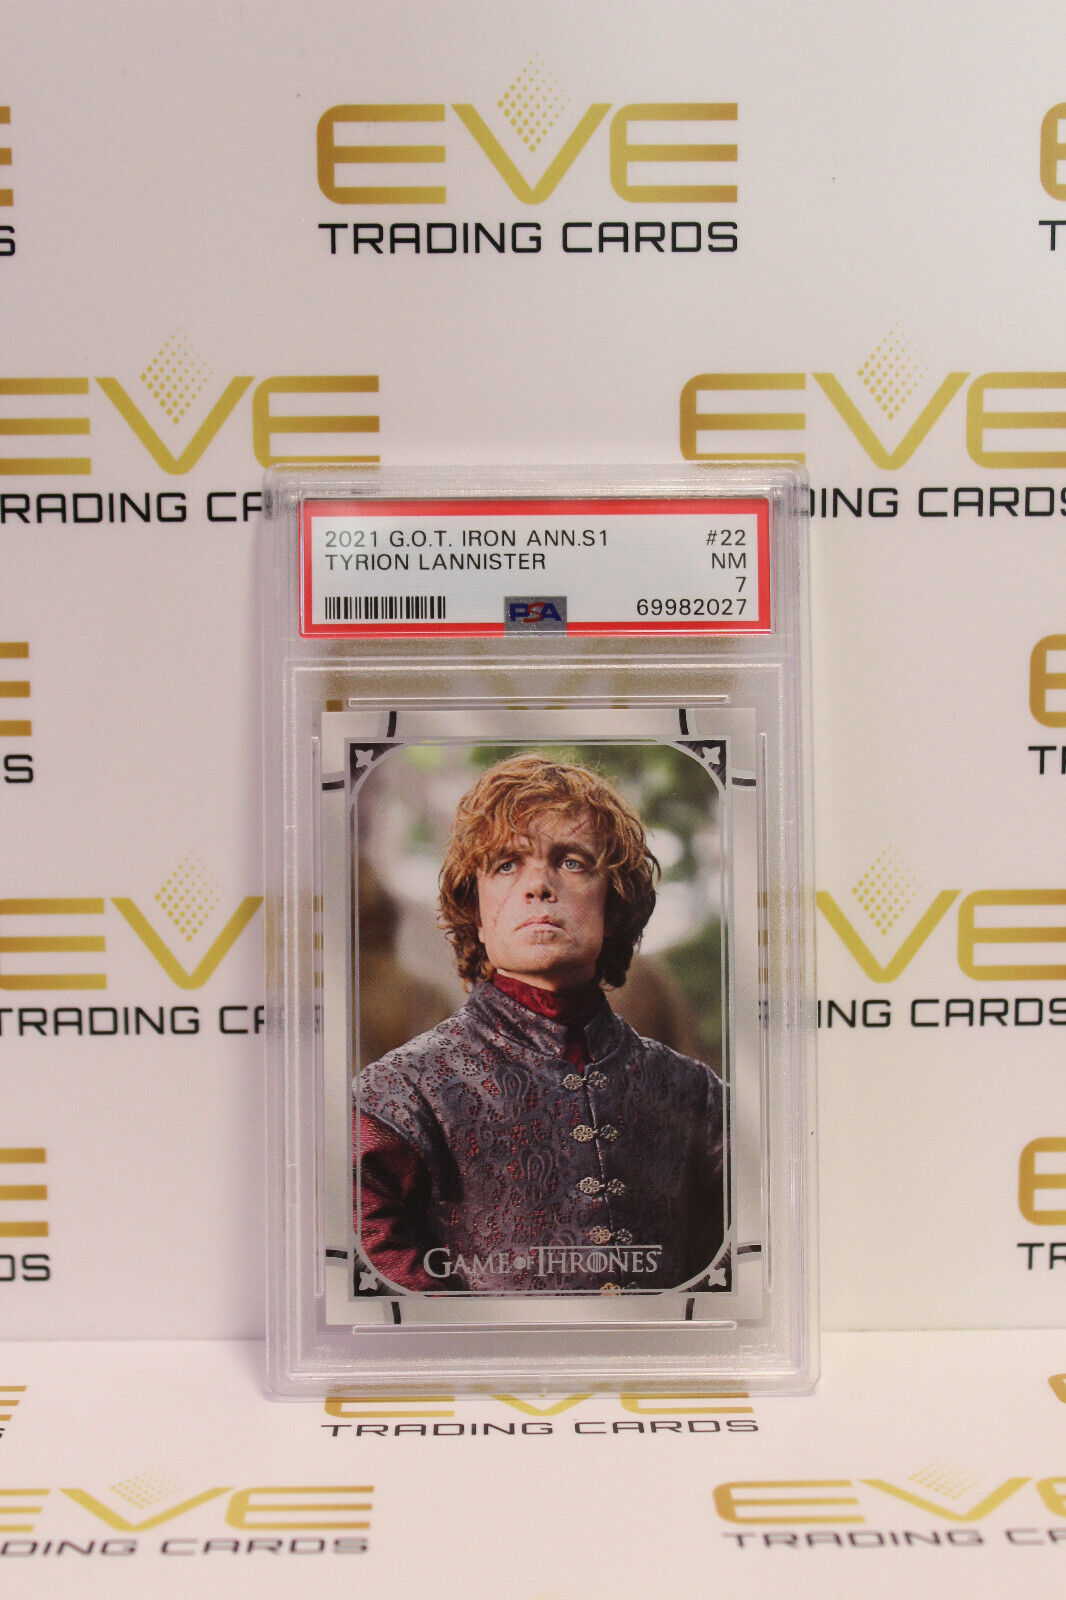 Graded Game of Thrones Card - 2021 Tyrion Lannister - PSA 7